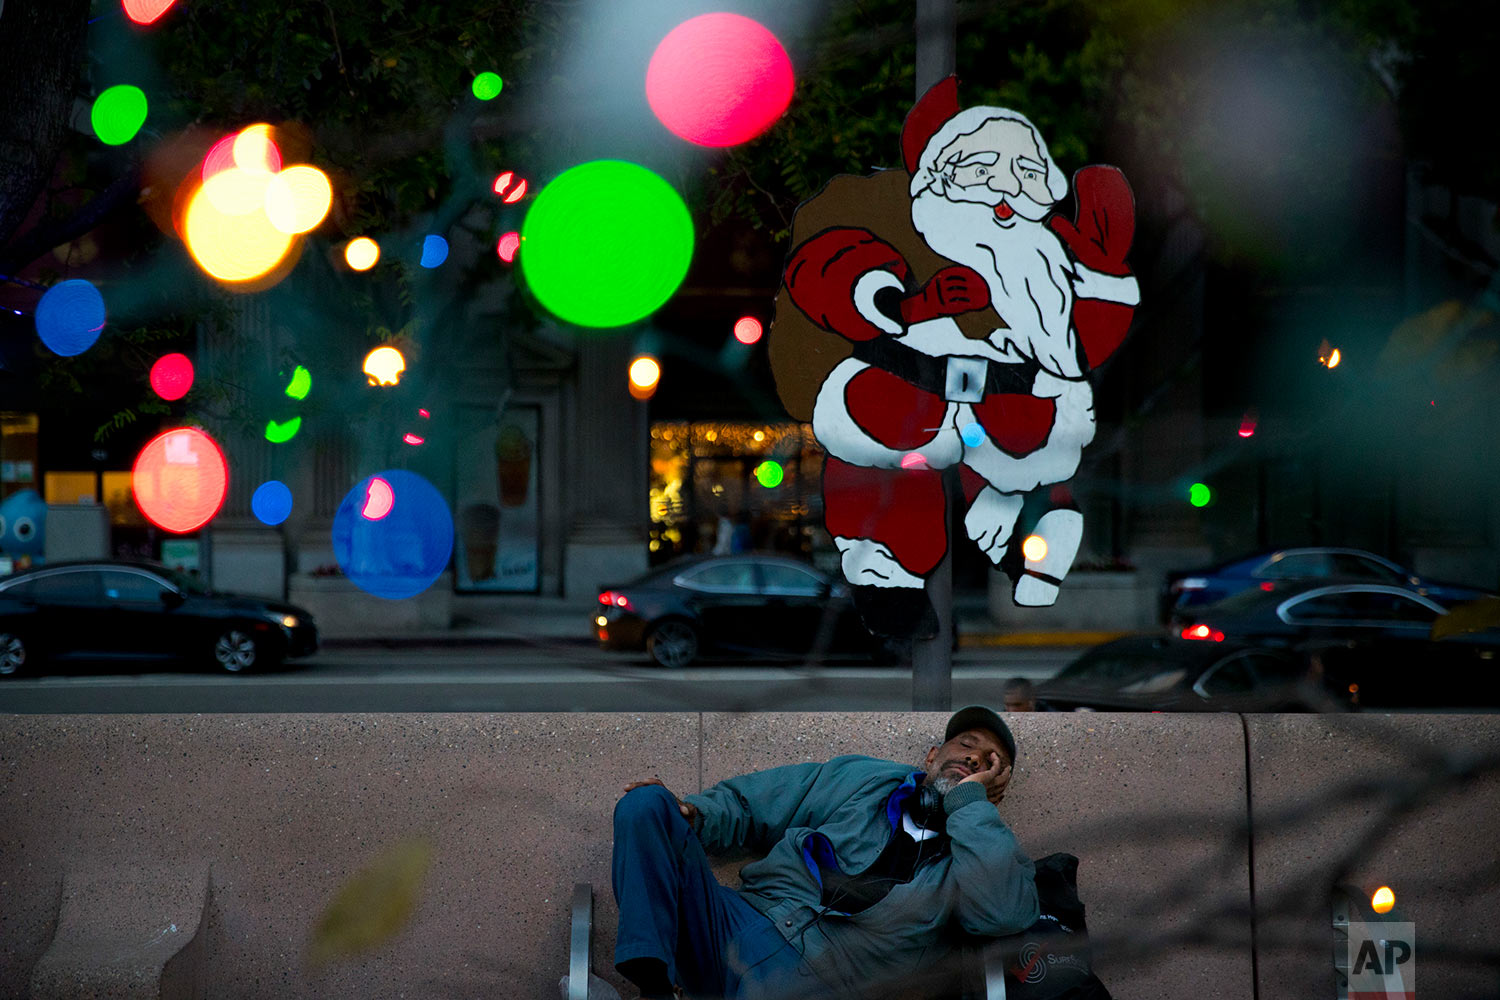  Homeless man Alonzo Harrison, 47, takes a nap on a bench at Pershing Square decorated with Christmas lights in the background on Monday, Dec. 4, 2017, in Los Angeles. A homeless crisis of unprecedented proportions is rocking the West Coast, and its 